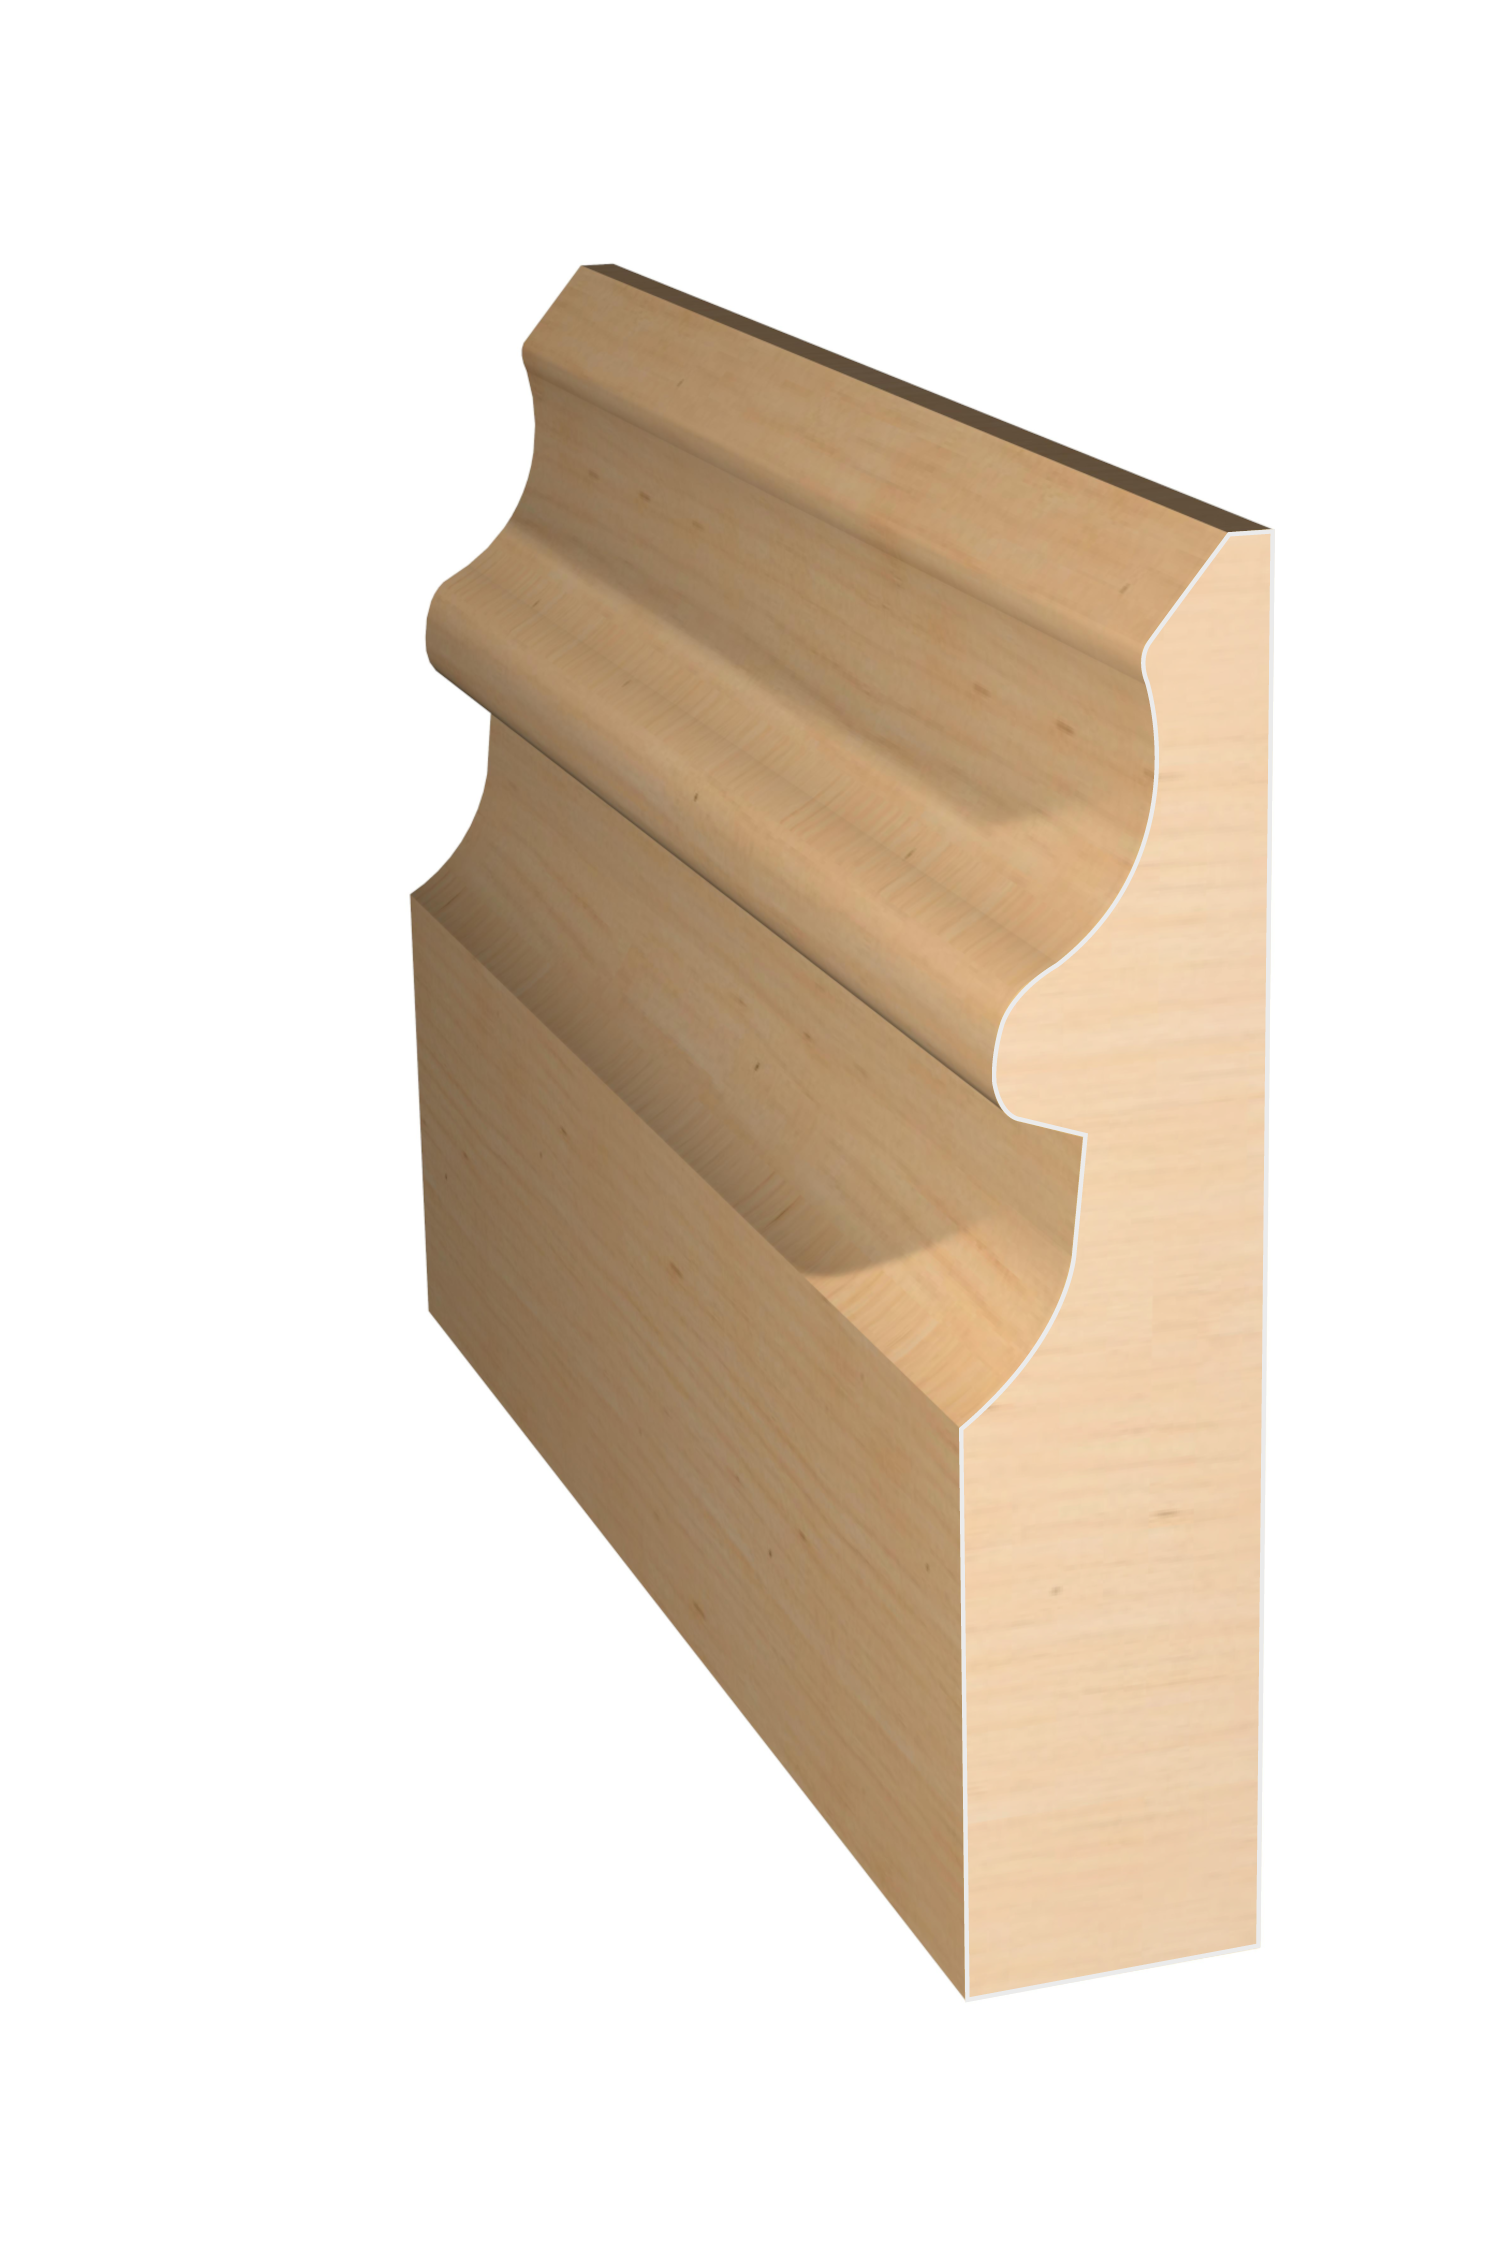 Three dimensional rendering of custom casing wood molding CAPL43 made by Public Lumber Company in Detroit.